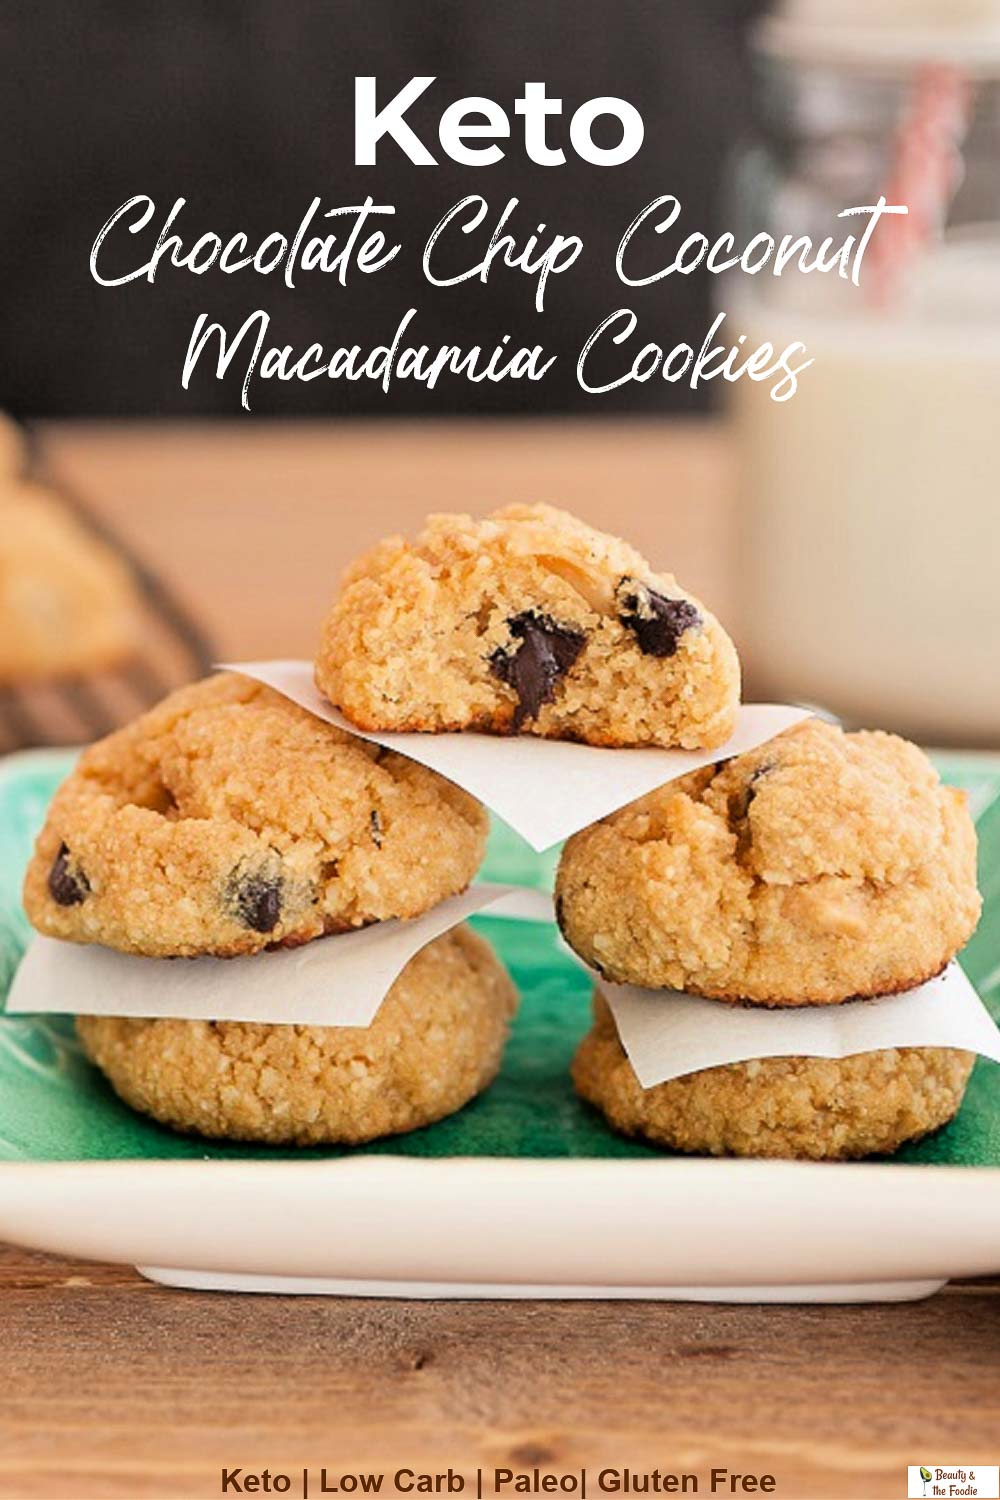  stack of chocolate chip coconut macadamia nut cookies.